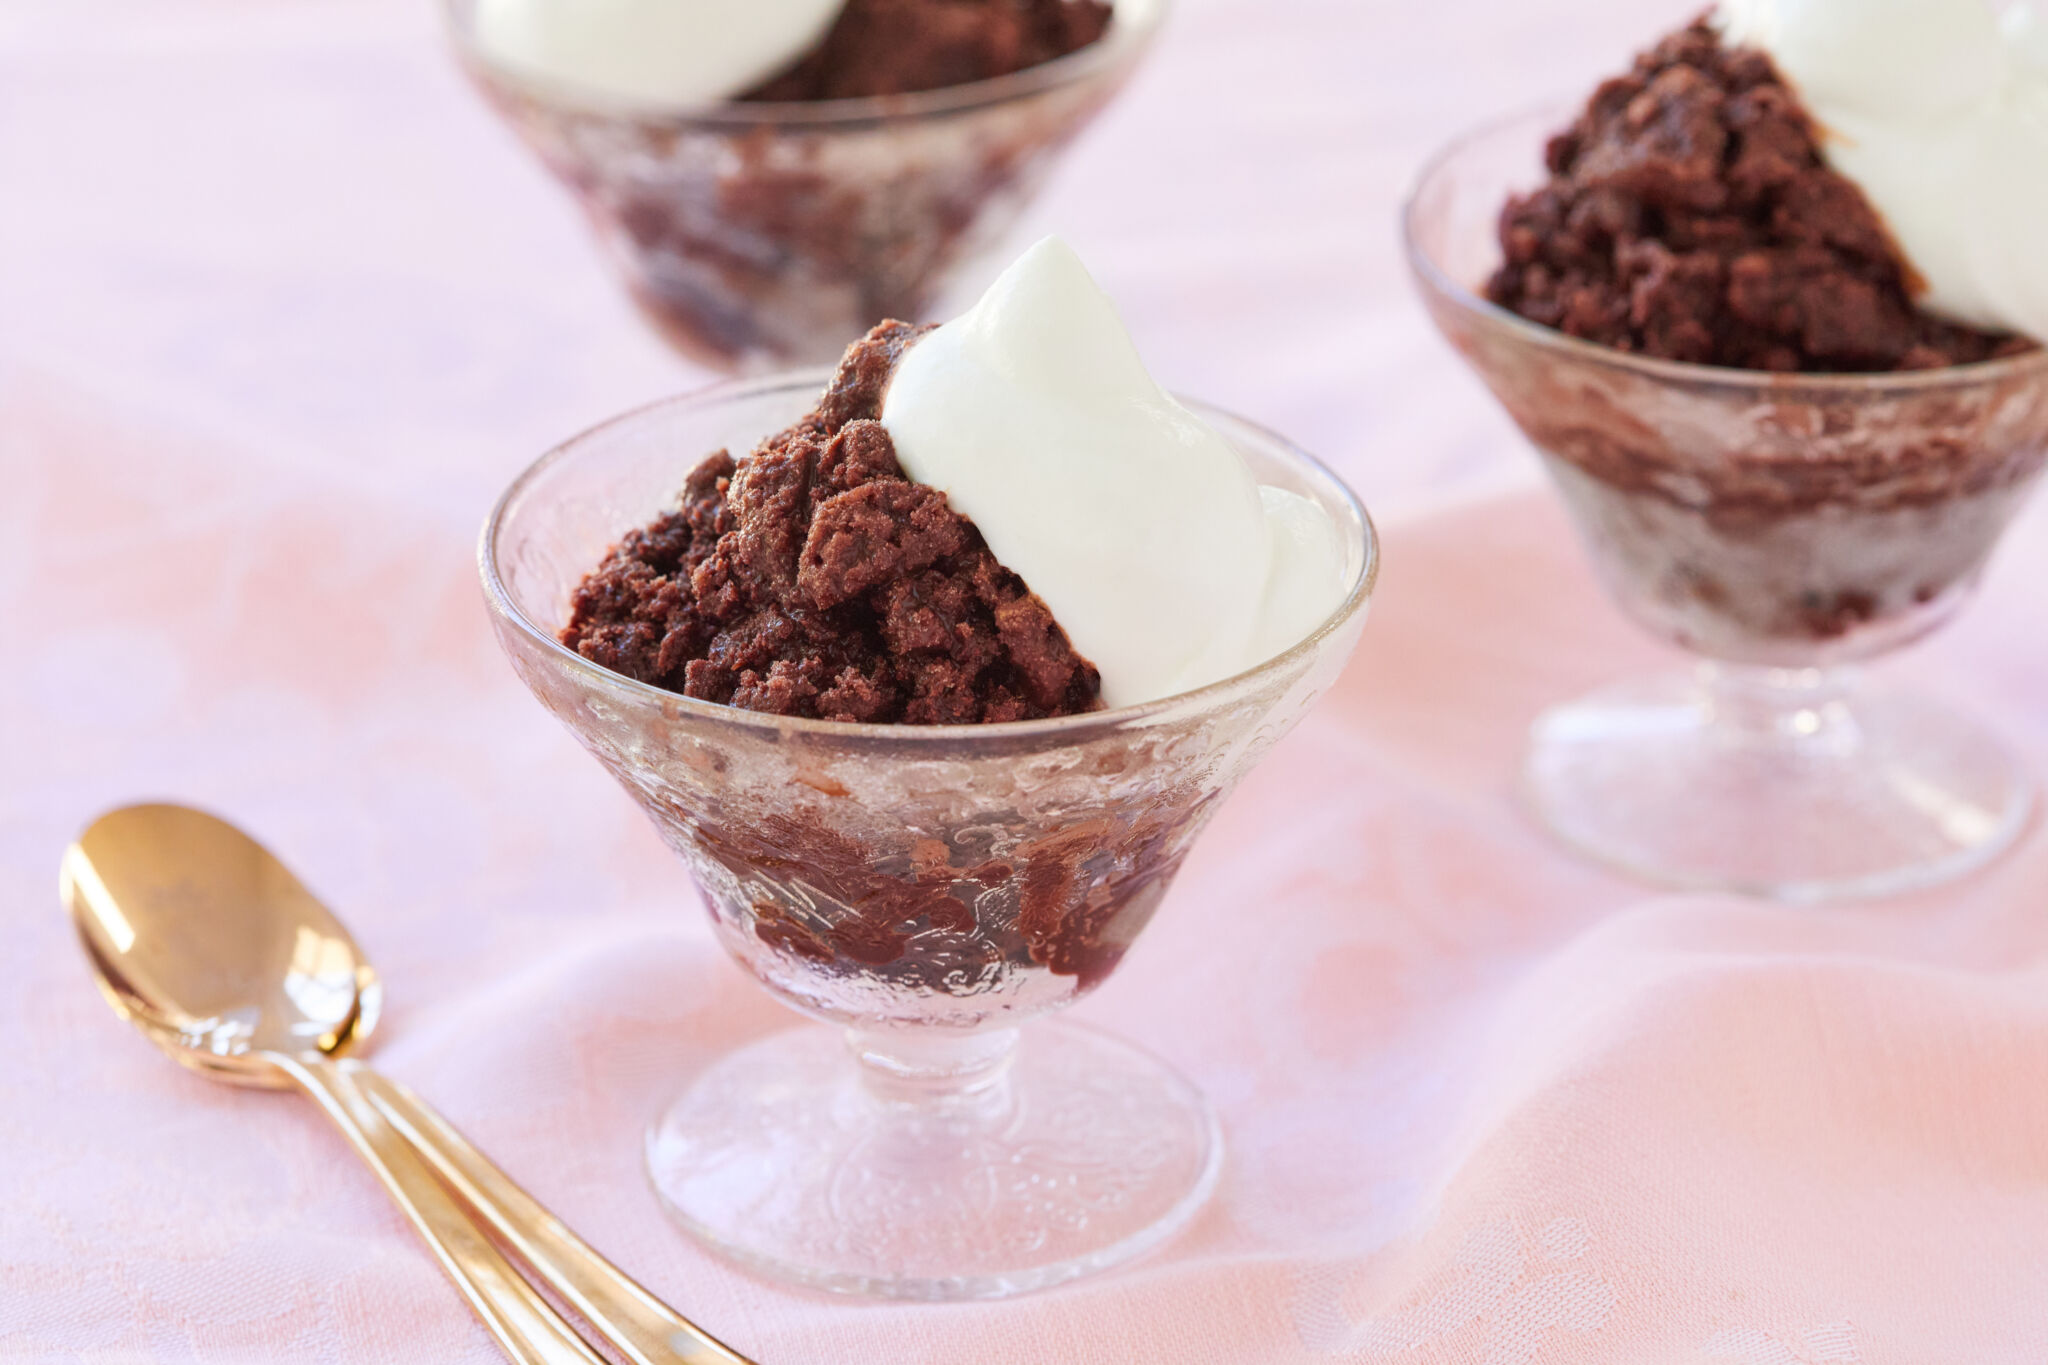 The crunchy semi frozen dessert Chocolate granita is served in 3 clear textured glass ice cream cups with perfectly whipped cream on top. A golden spoon in the left bottom corner.